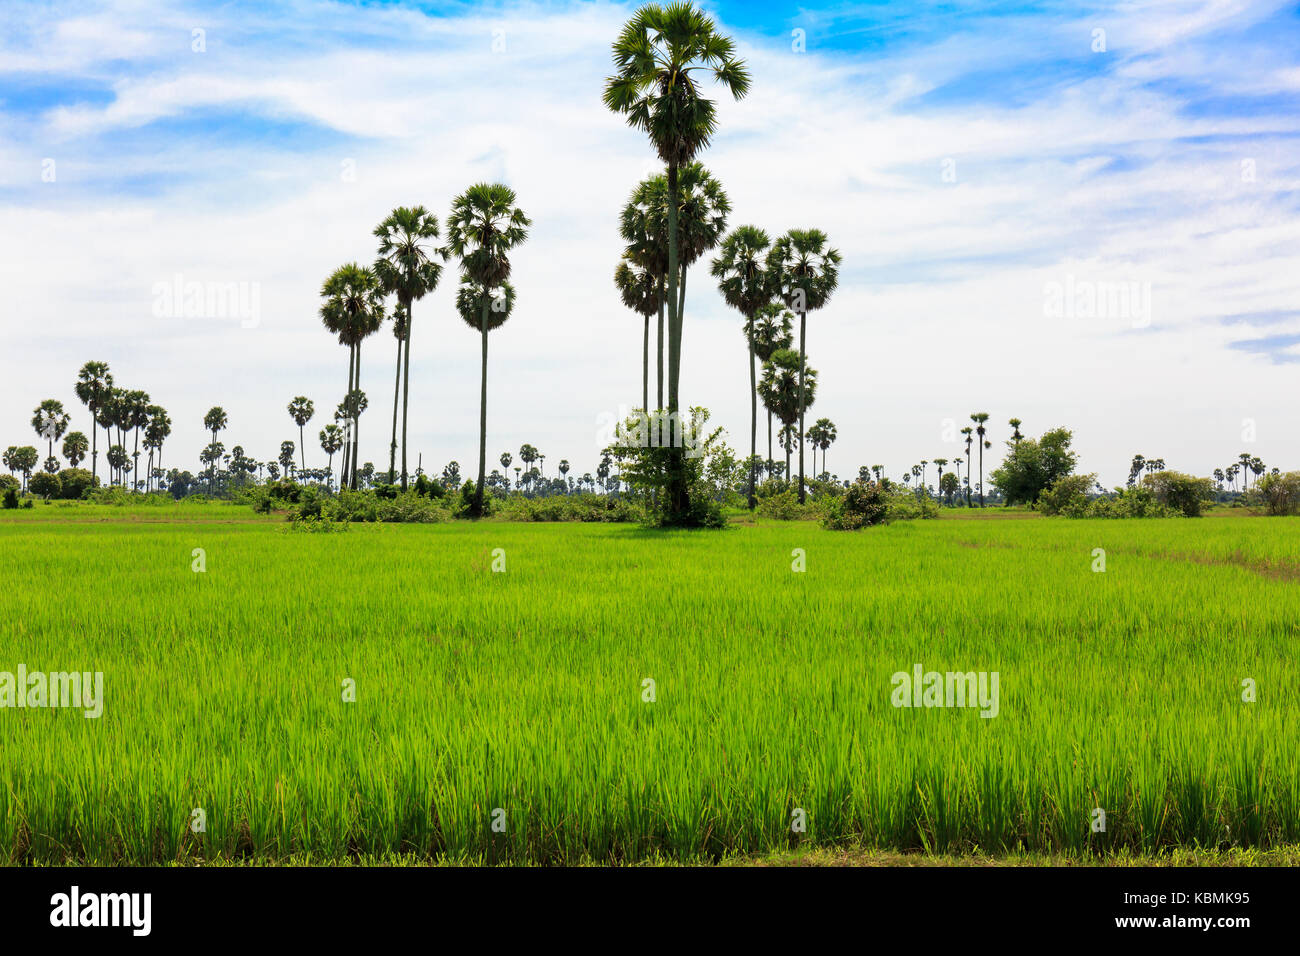 Idyllic View of Green Rice Field with Palm Trees and Blue Sky. Stock Photo